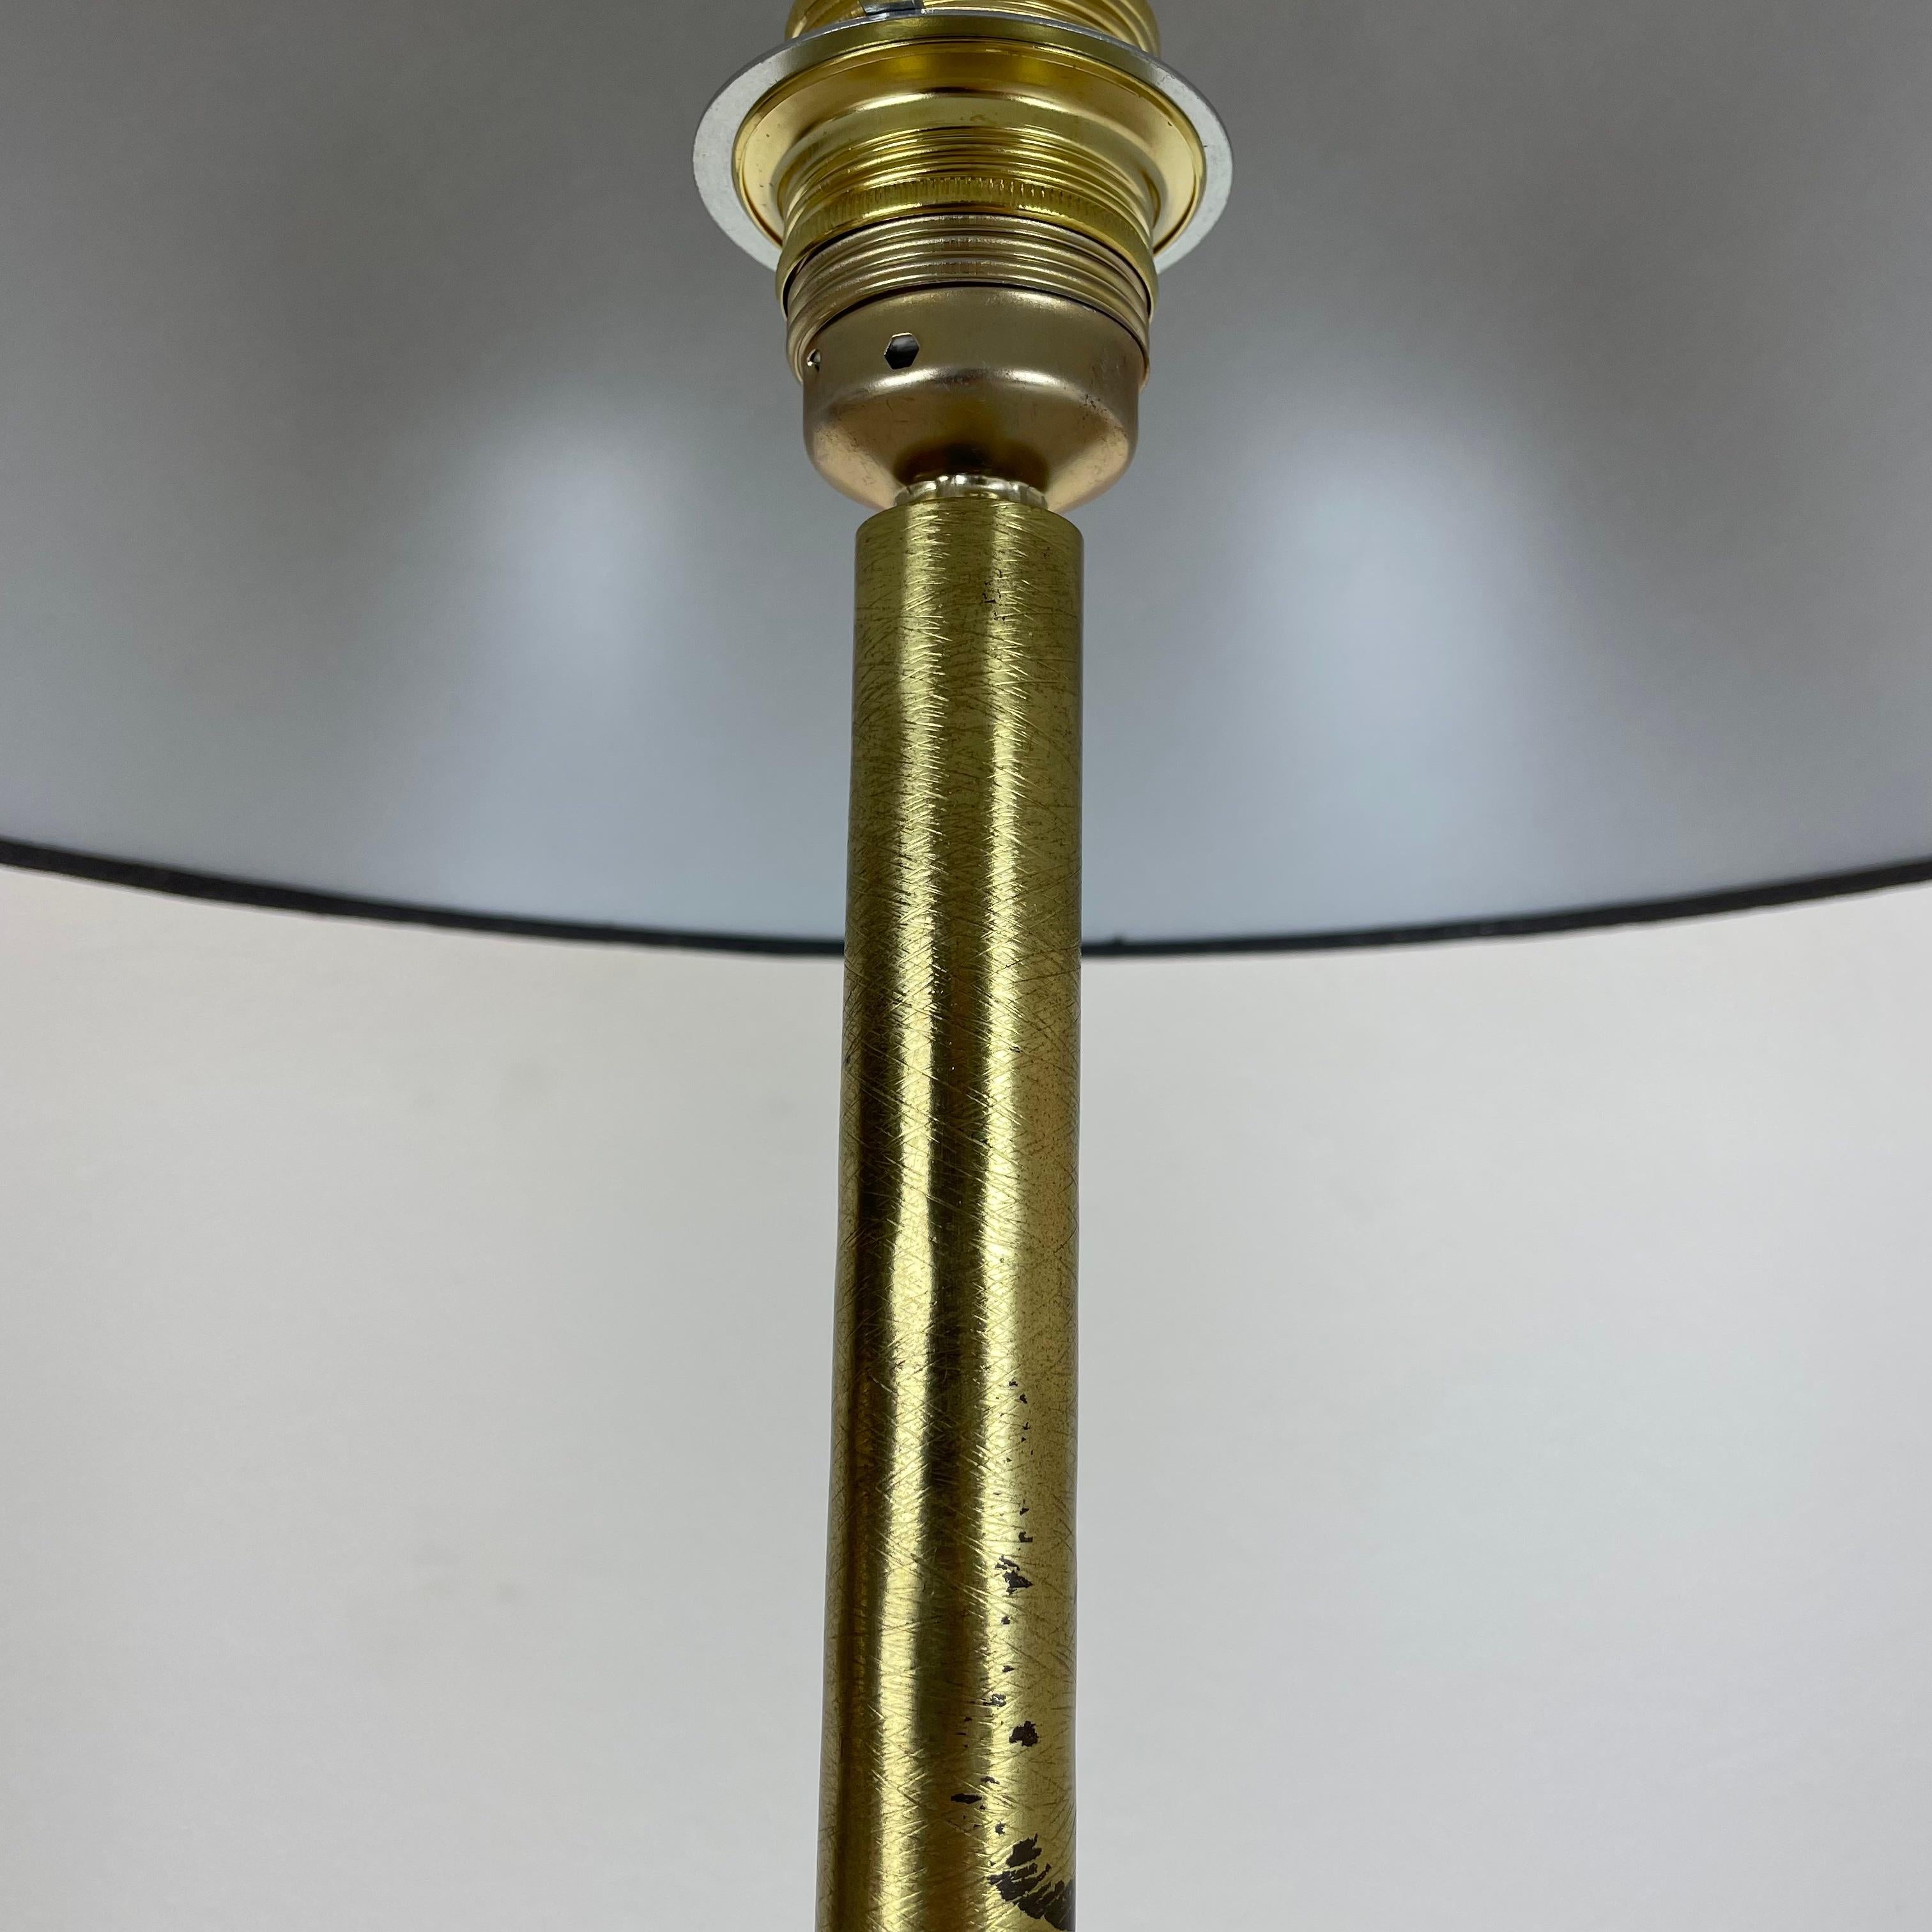 Original Hollywood Regency Style Floral Brutalist Brass Table Light, Italy 1970s For Sale 2